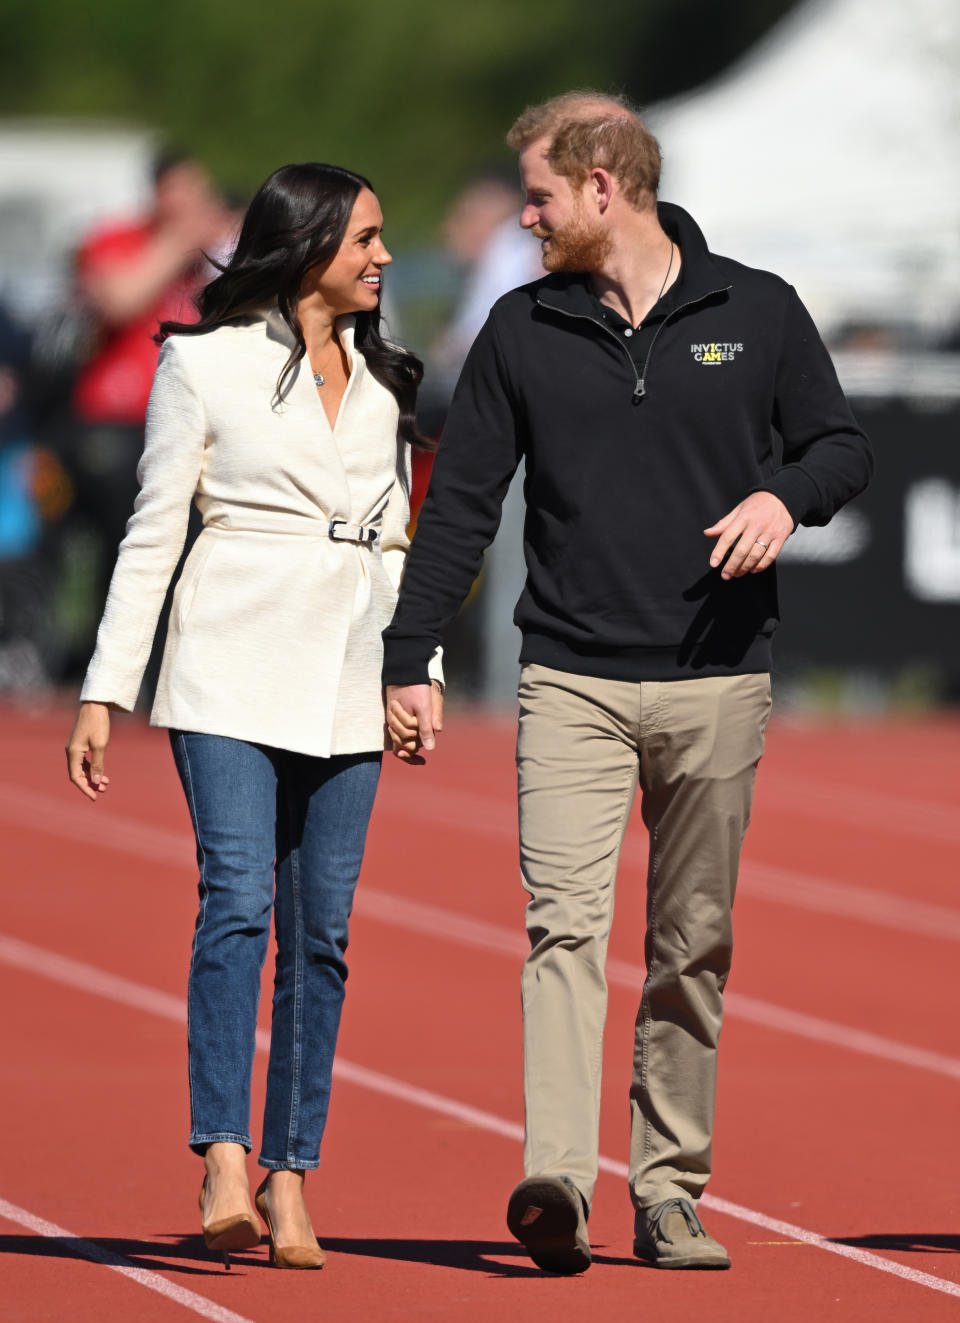 THE HAGUE, NETHERLANDS - APRIL 17: Prince Harry, Duke of Sussex and Meghan, Duchess of Sussex attend the athletics event during the Invictus Games at Zuiderpark on April 17, 2022 in The Hague, Netherlands. They reportedly also filmed for their upcoming Netflix documentary 'Heart of Invictus' while they were there. (Photo by Karwai Tang/WireImage)